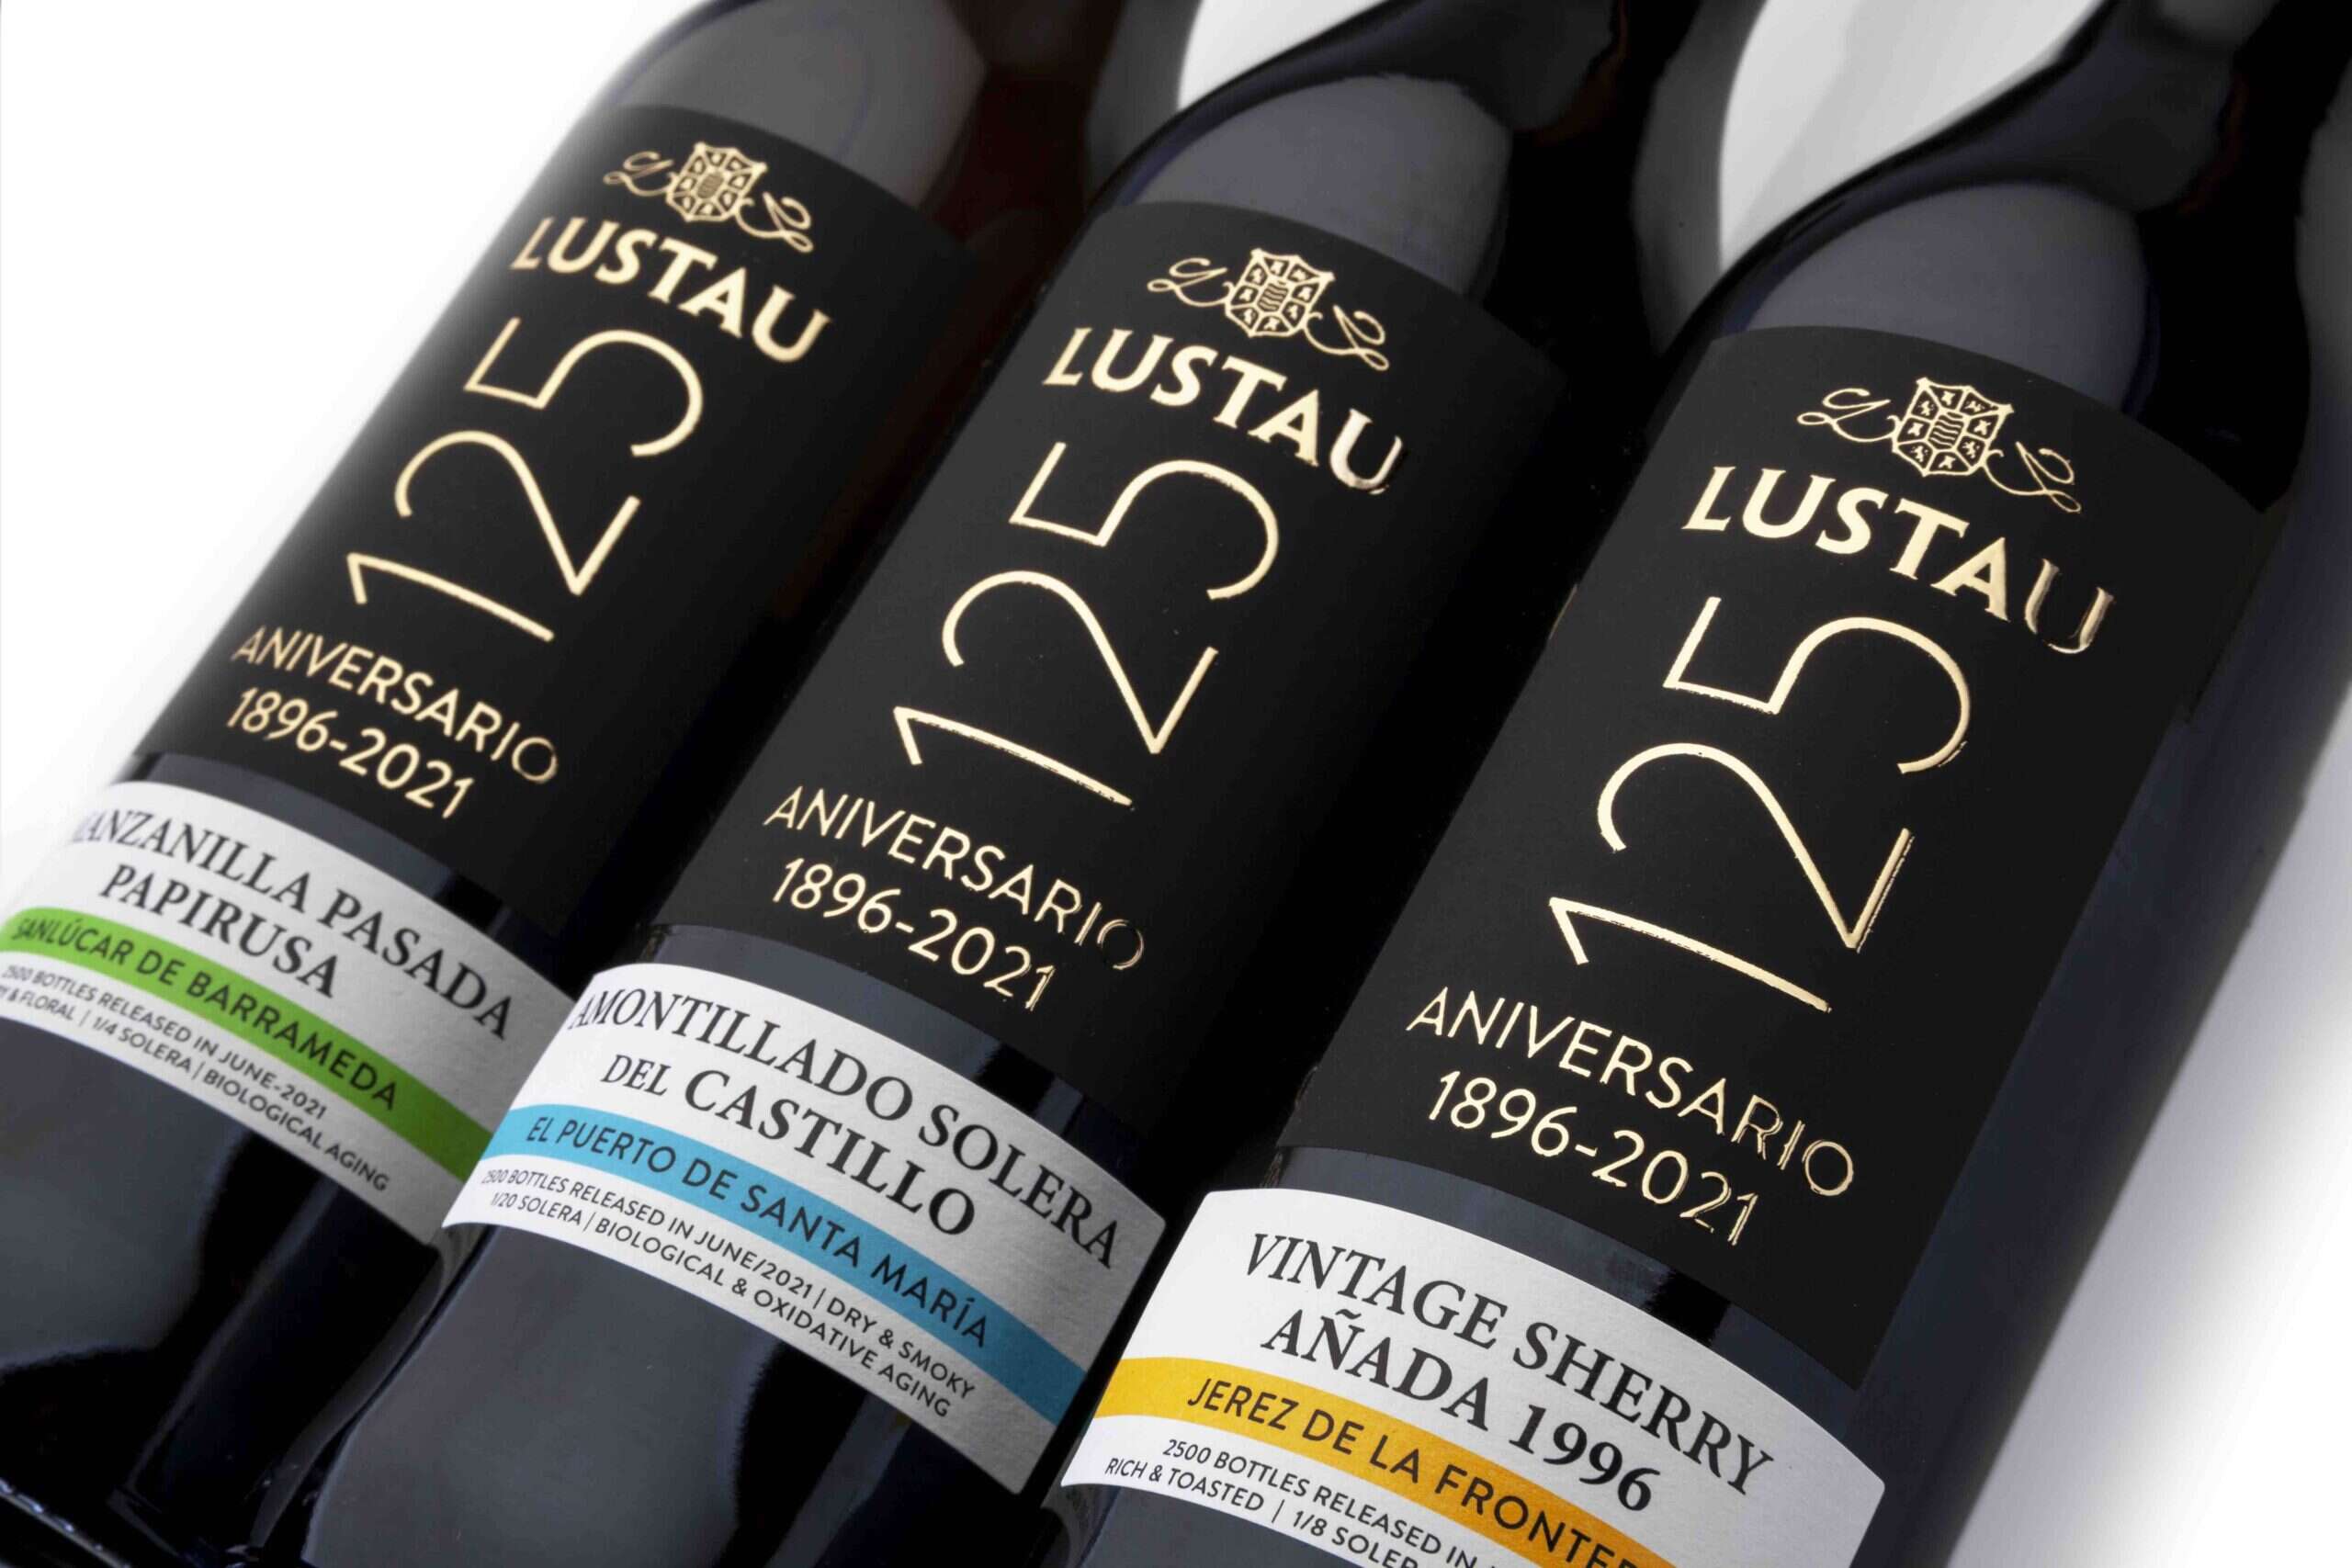 Lustau 125th Anniversary Collection: The Golden Triangle